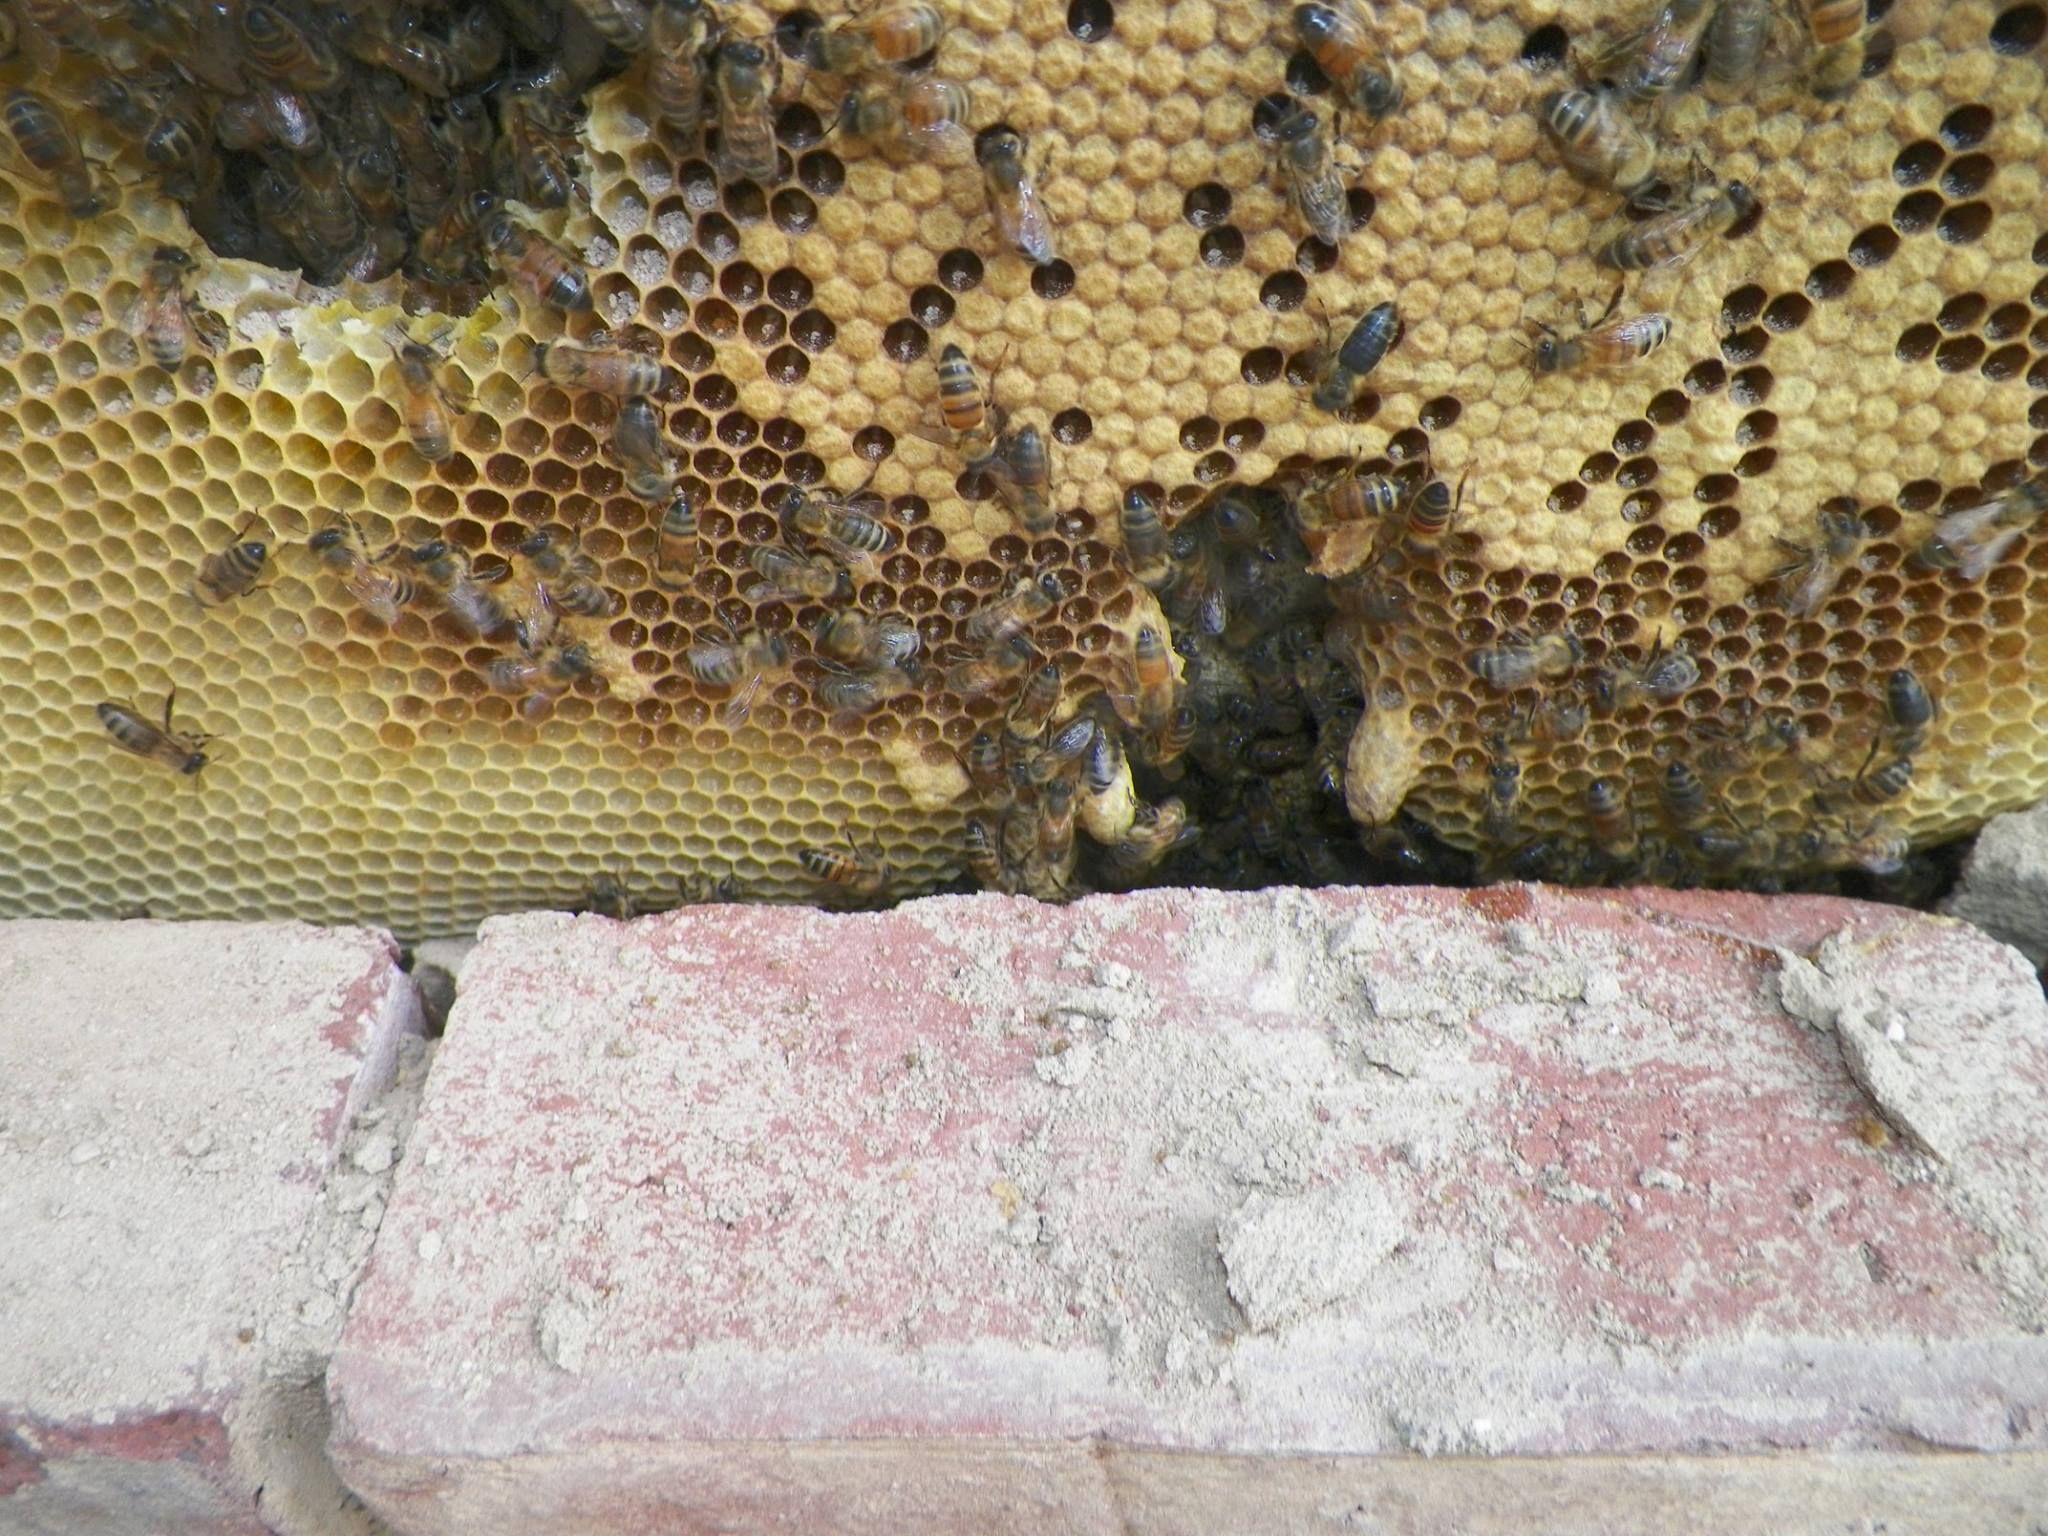 Expert Bee Whisperer Discovers Enormous Beehive Hidden Inside A Brick Wall